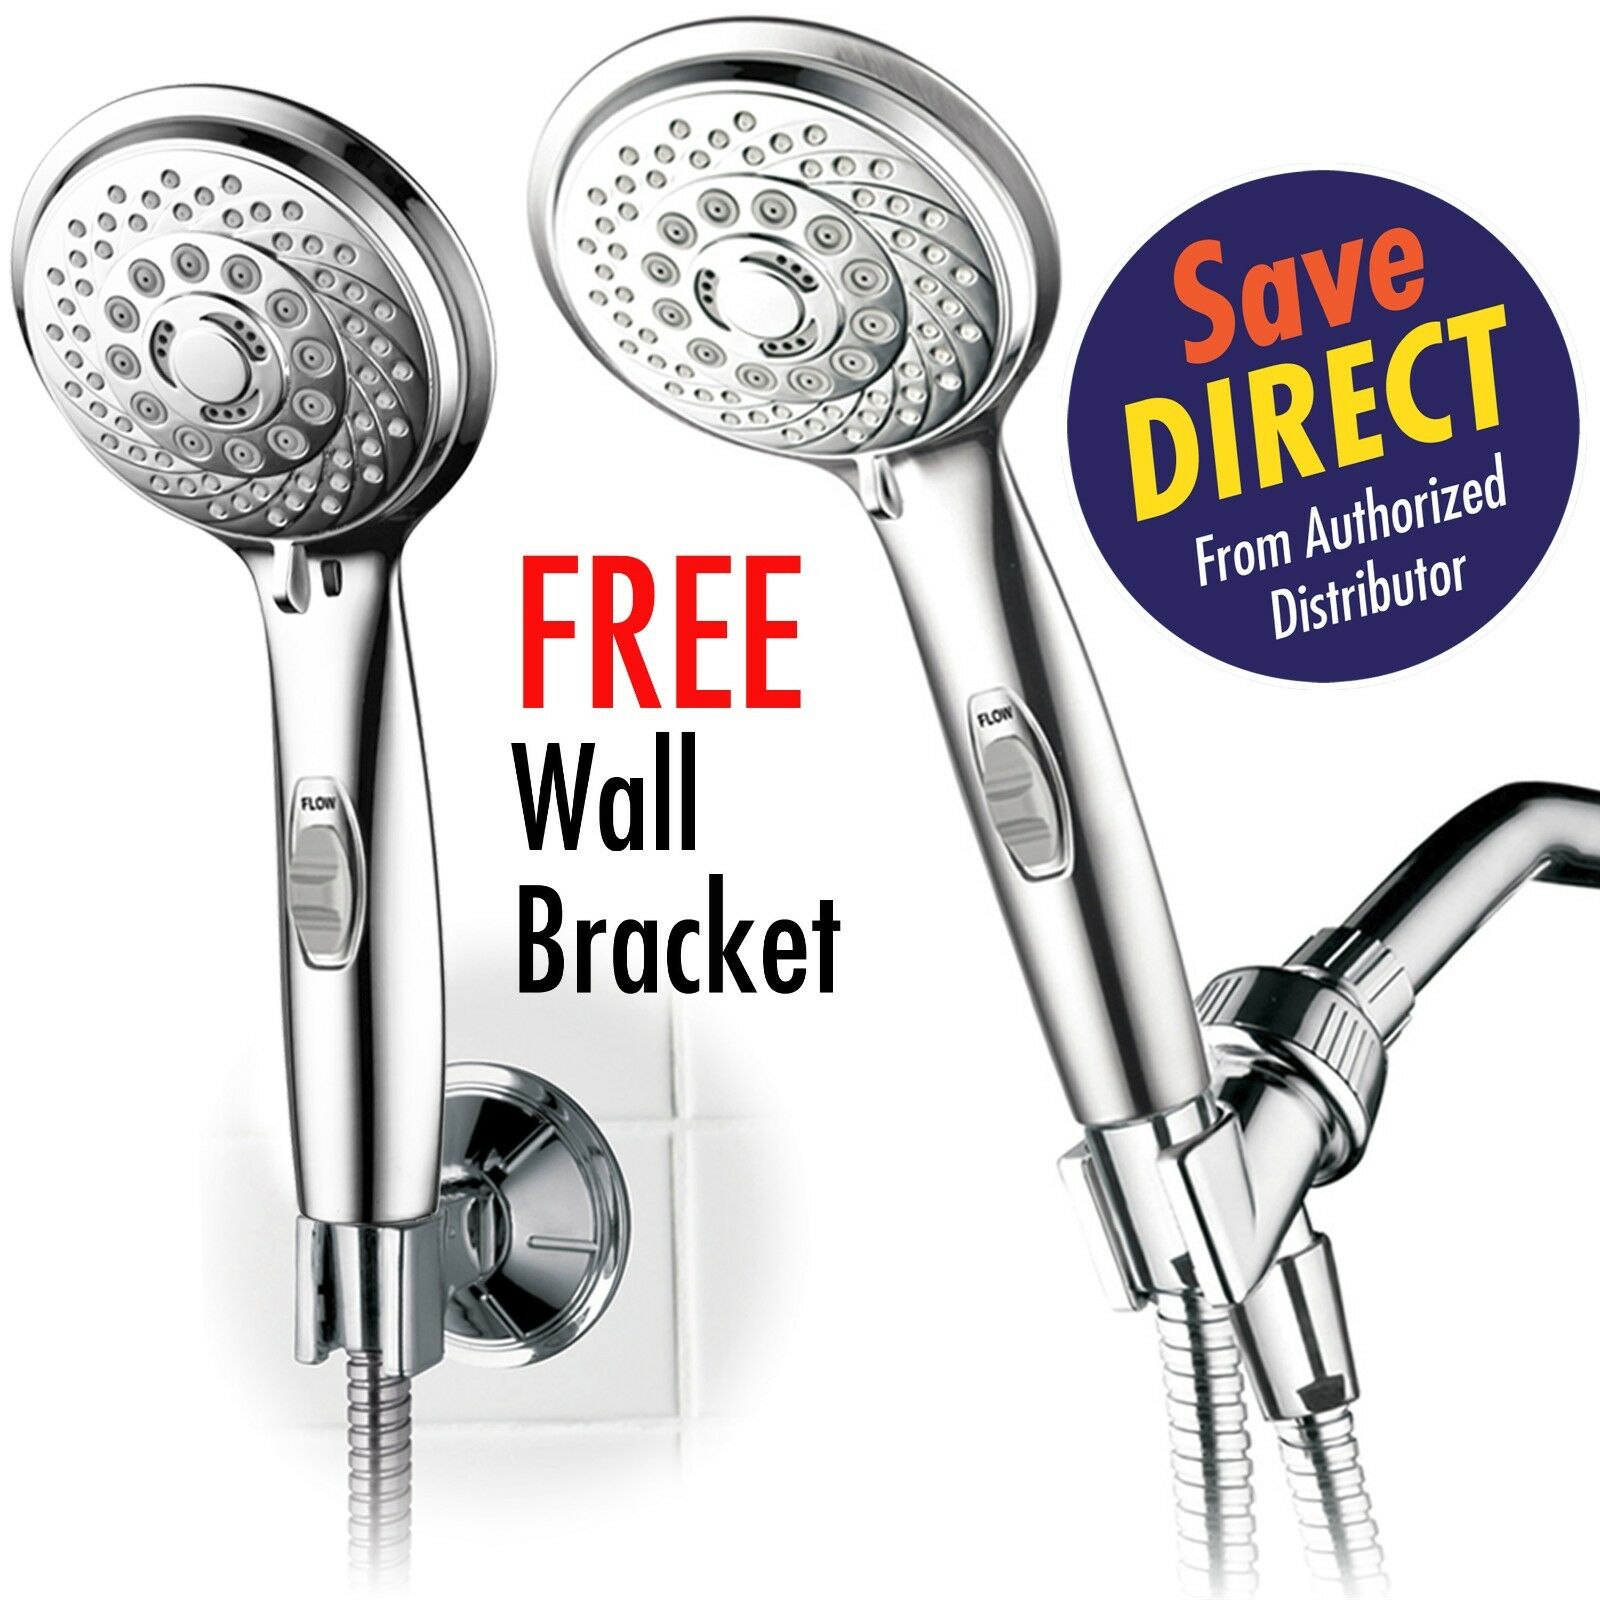 Hotelspa 4 Inch Hand Shower With 7-settings And Pause Switch, All-chrome Finish